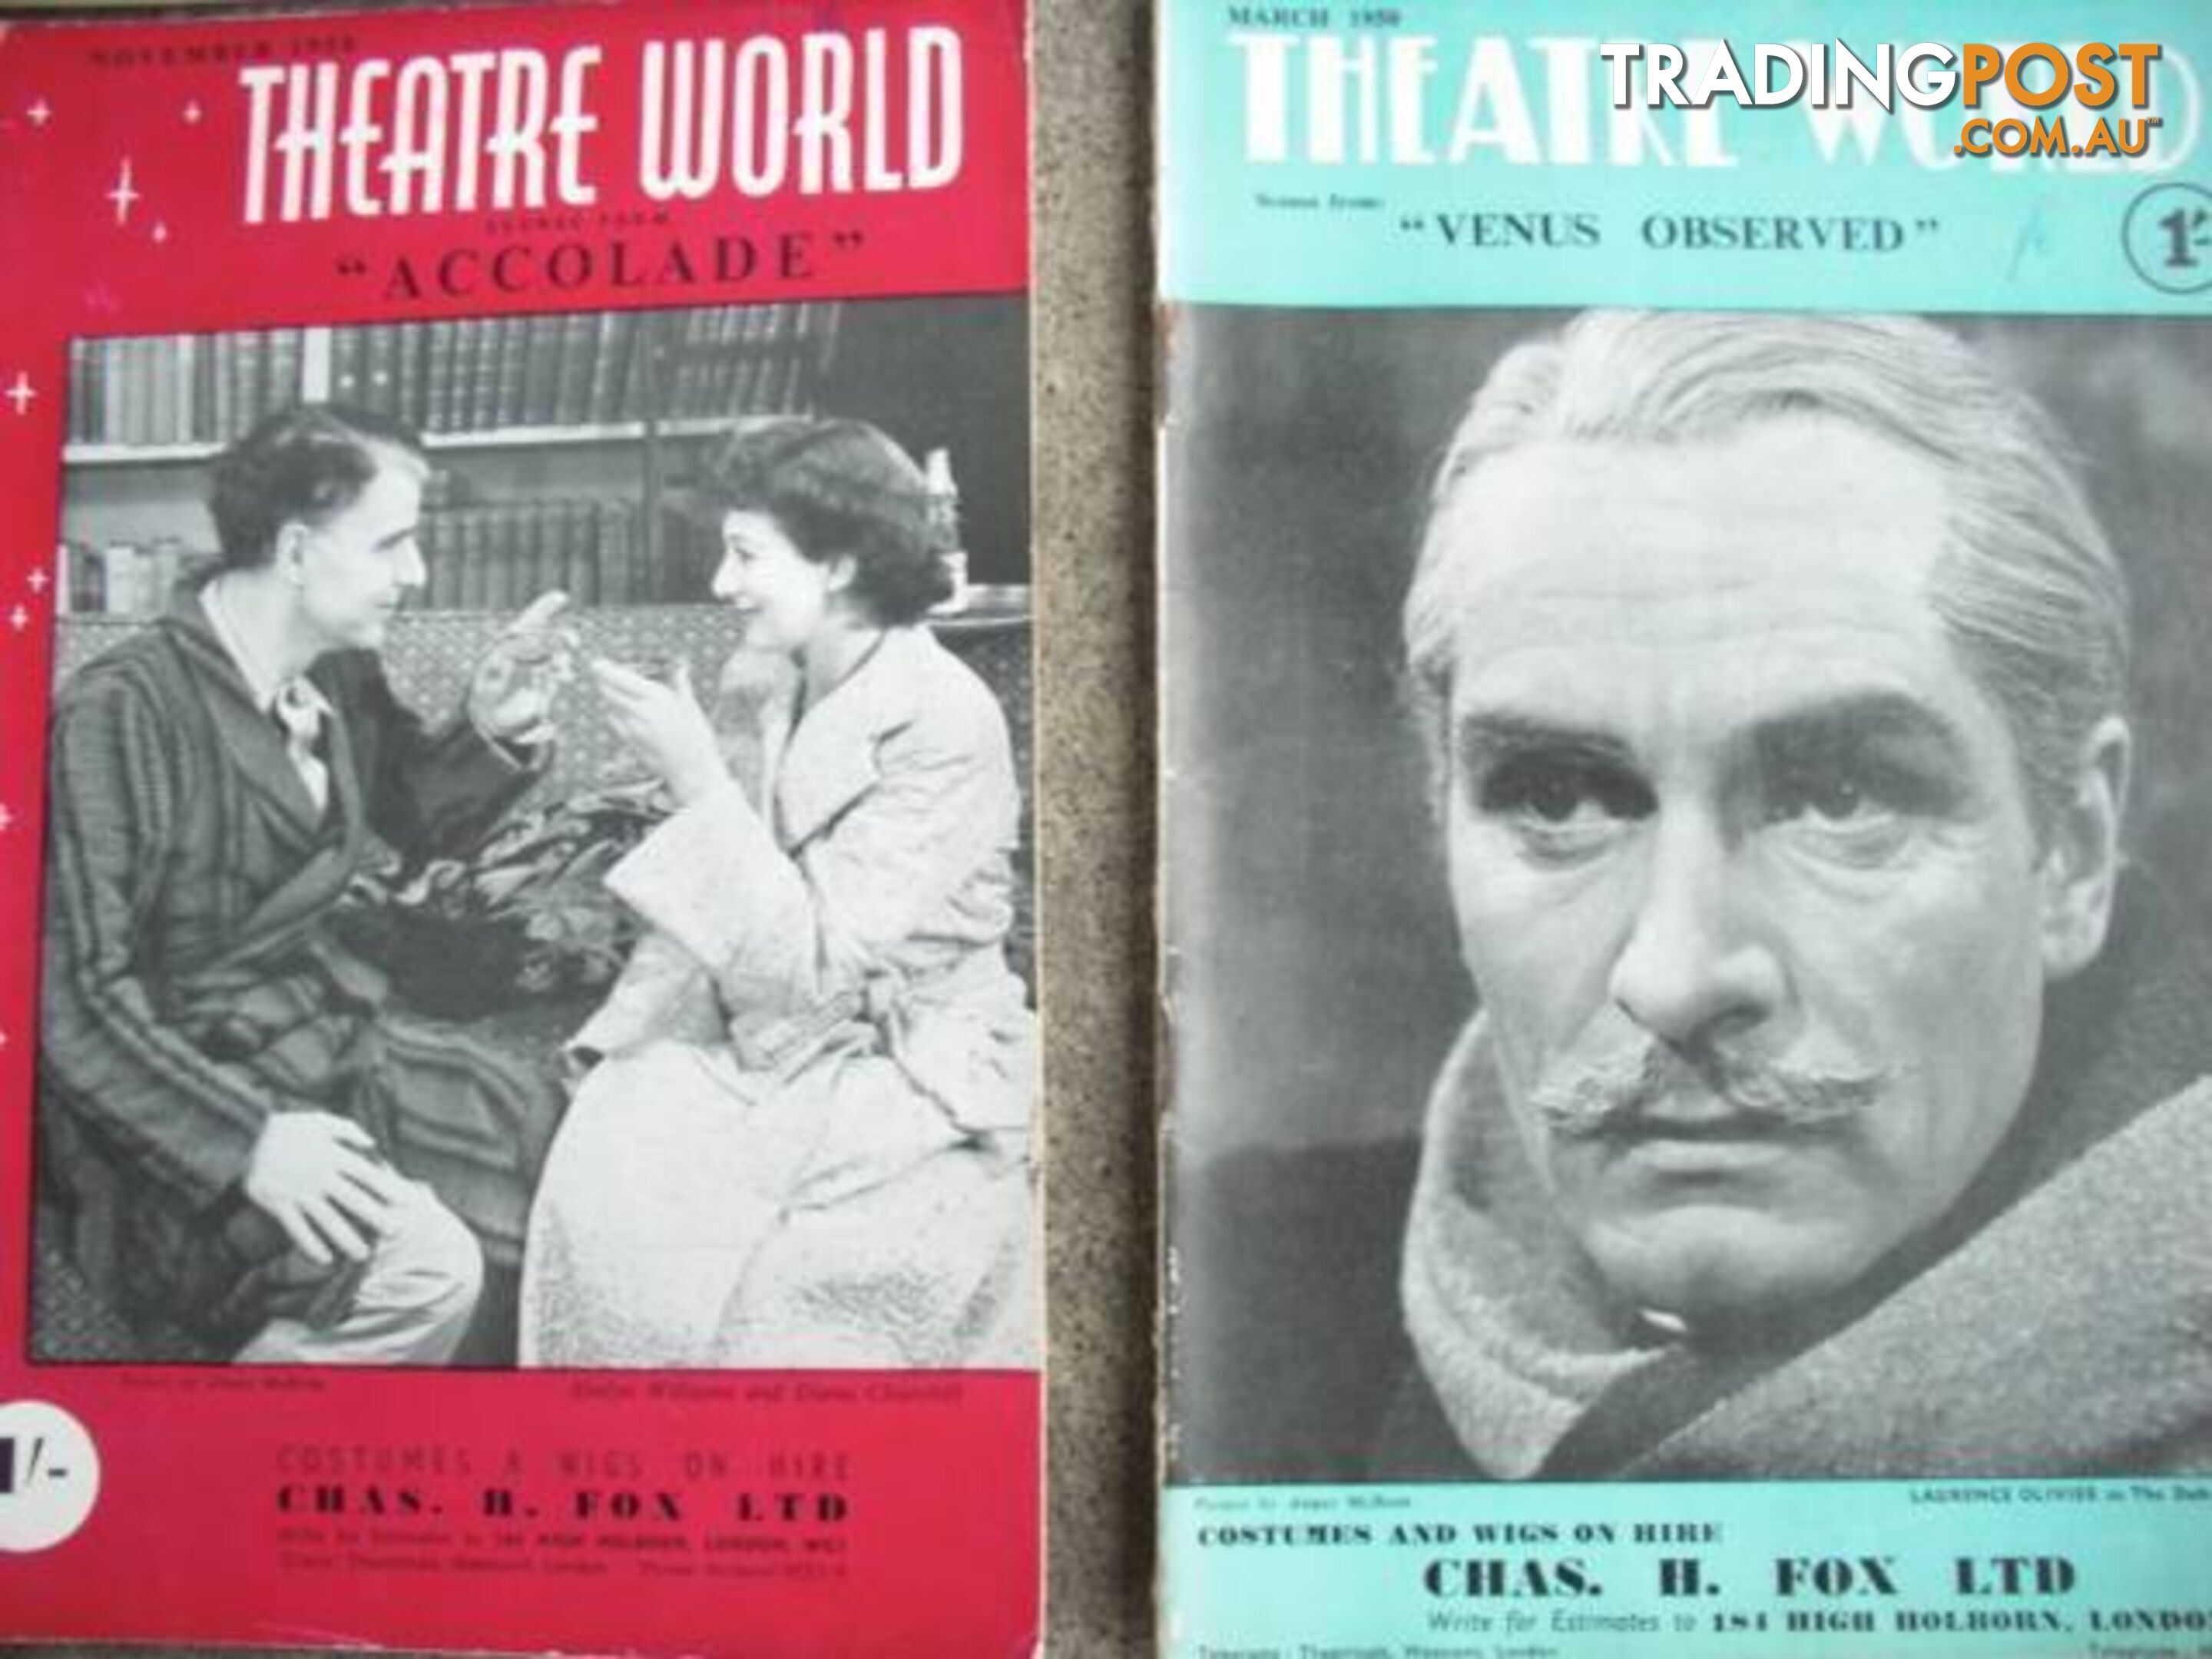 VINTAGE THEATRE WORLD******1950 1960 20 ISSUES GOOD CONDITION